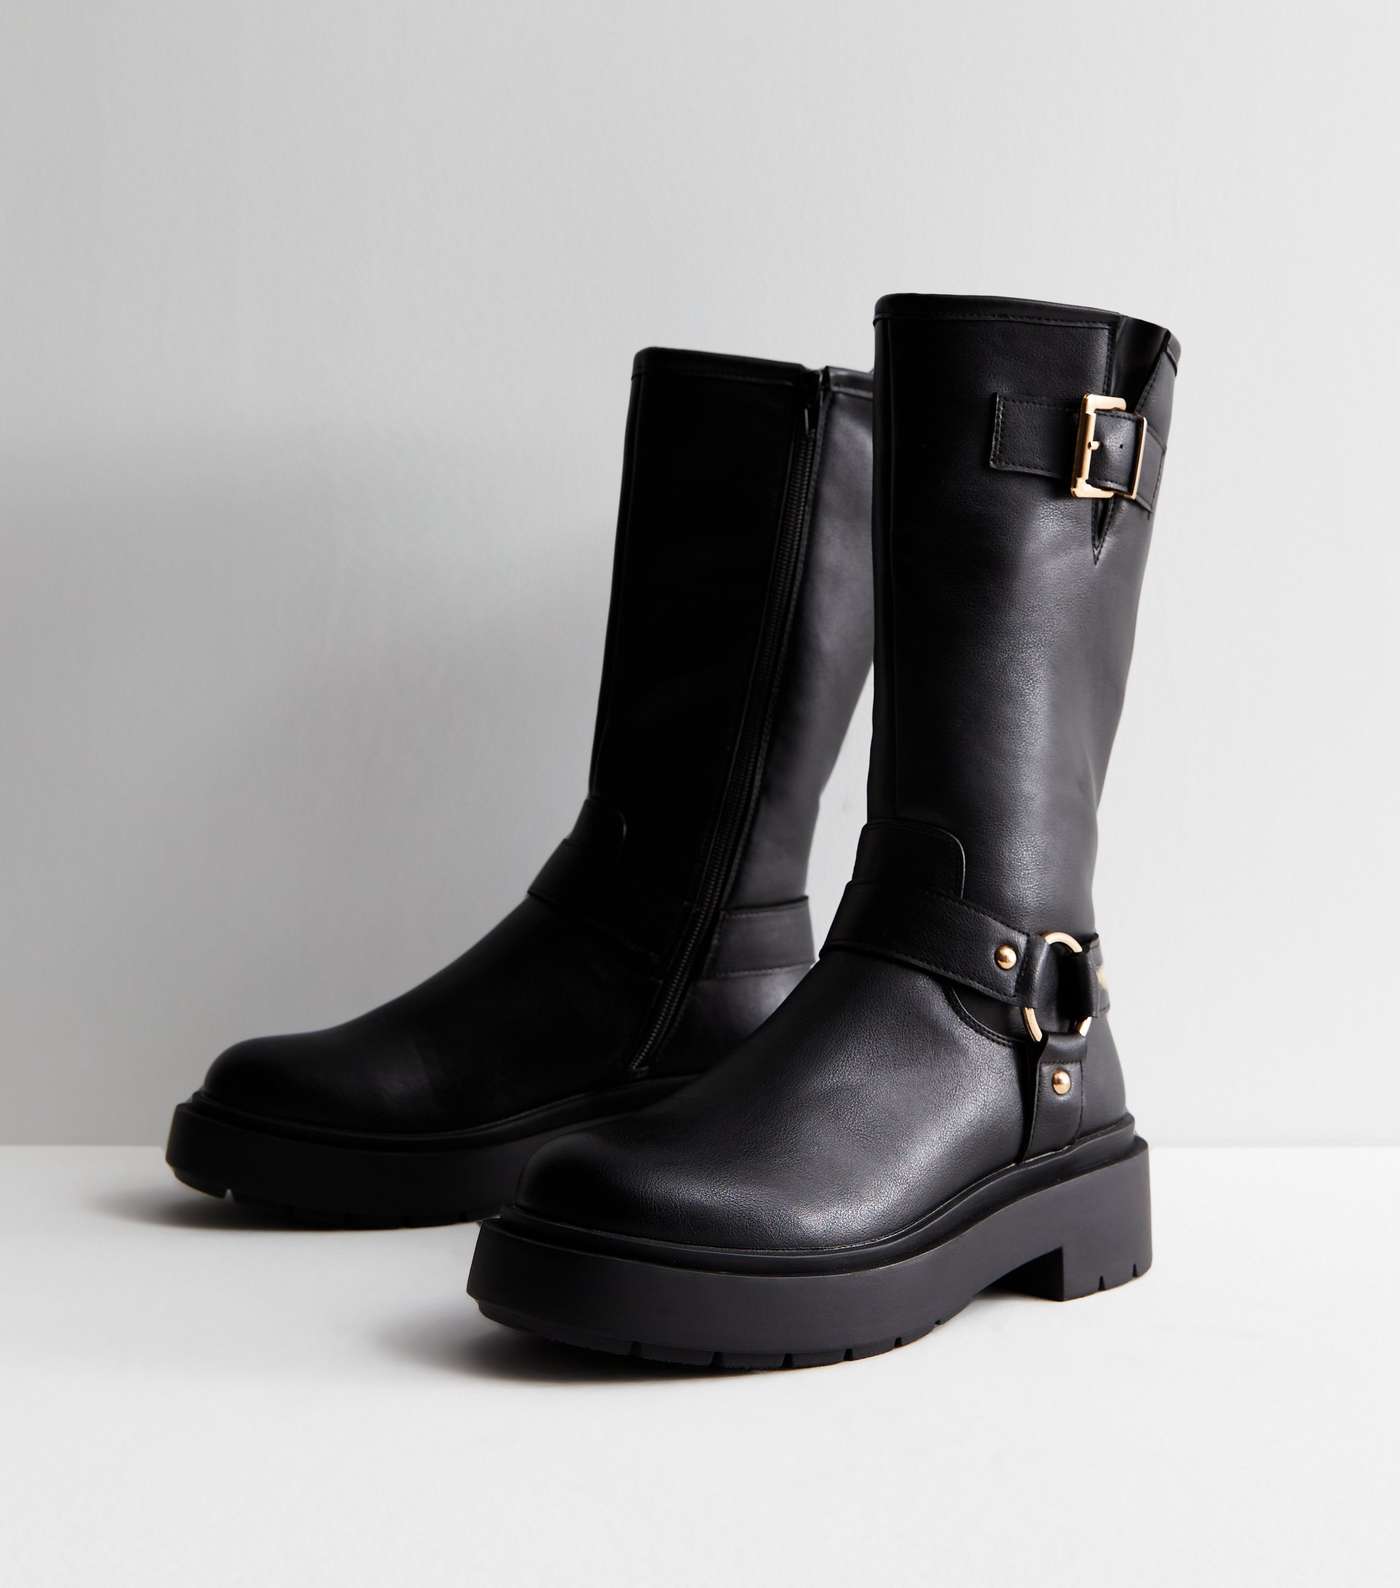 Black Leather-Look Stretch Calf Biker Boots Image 2